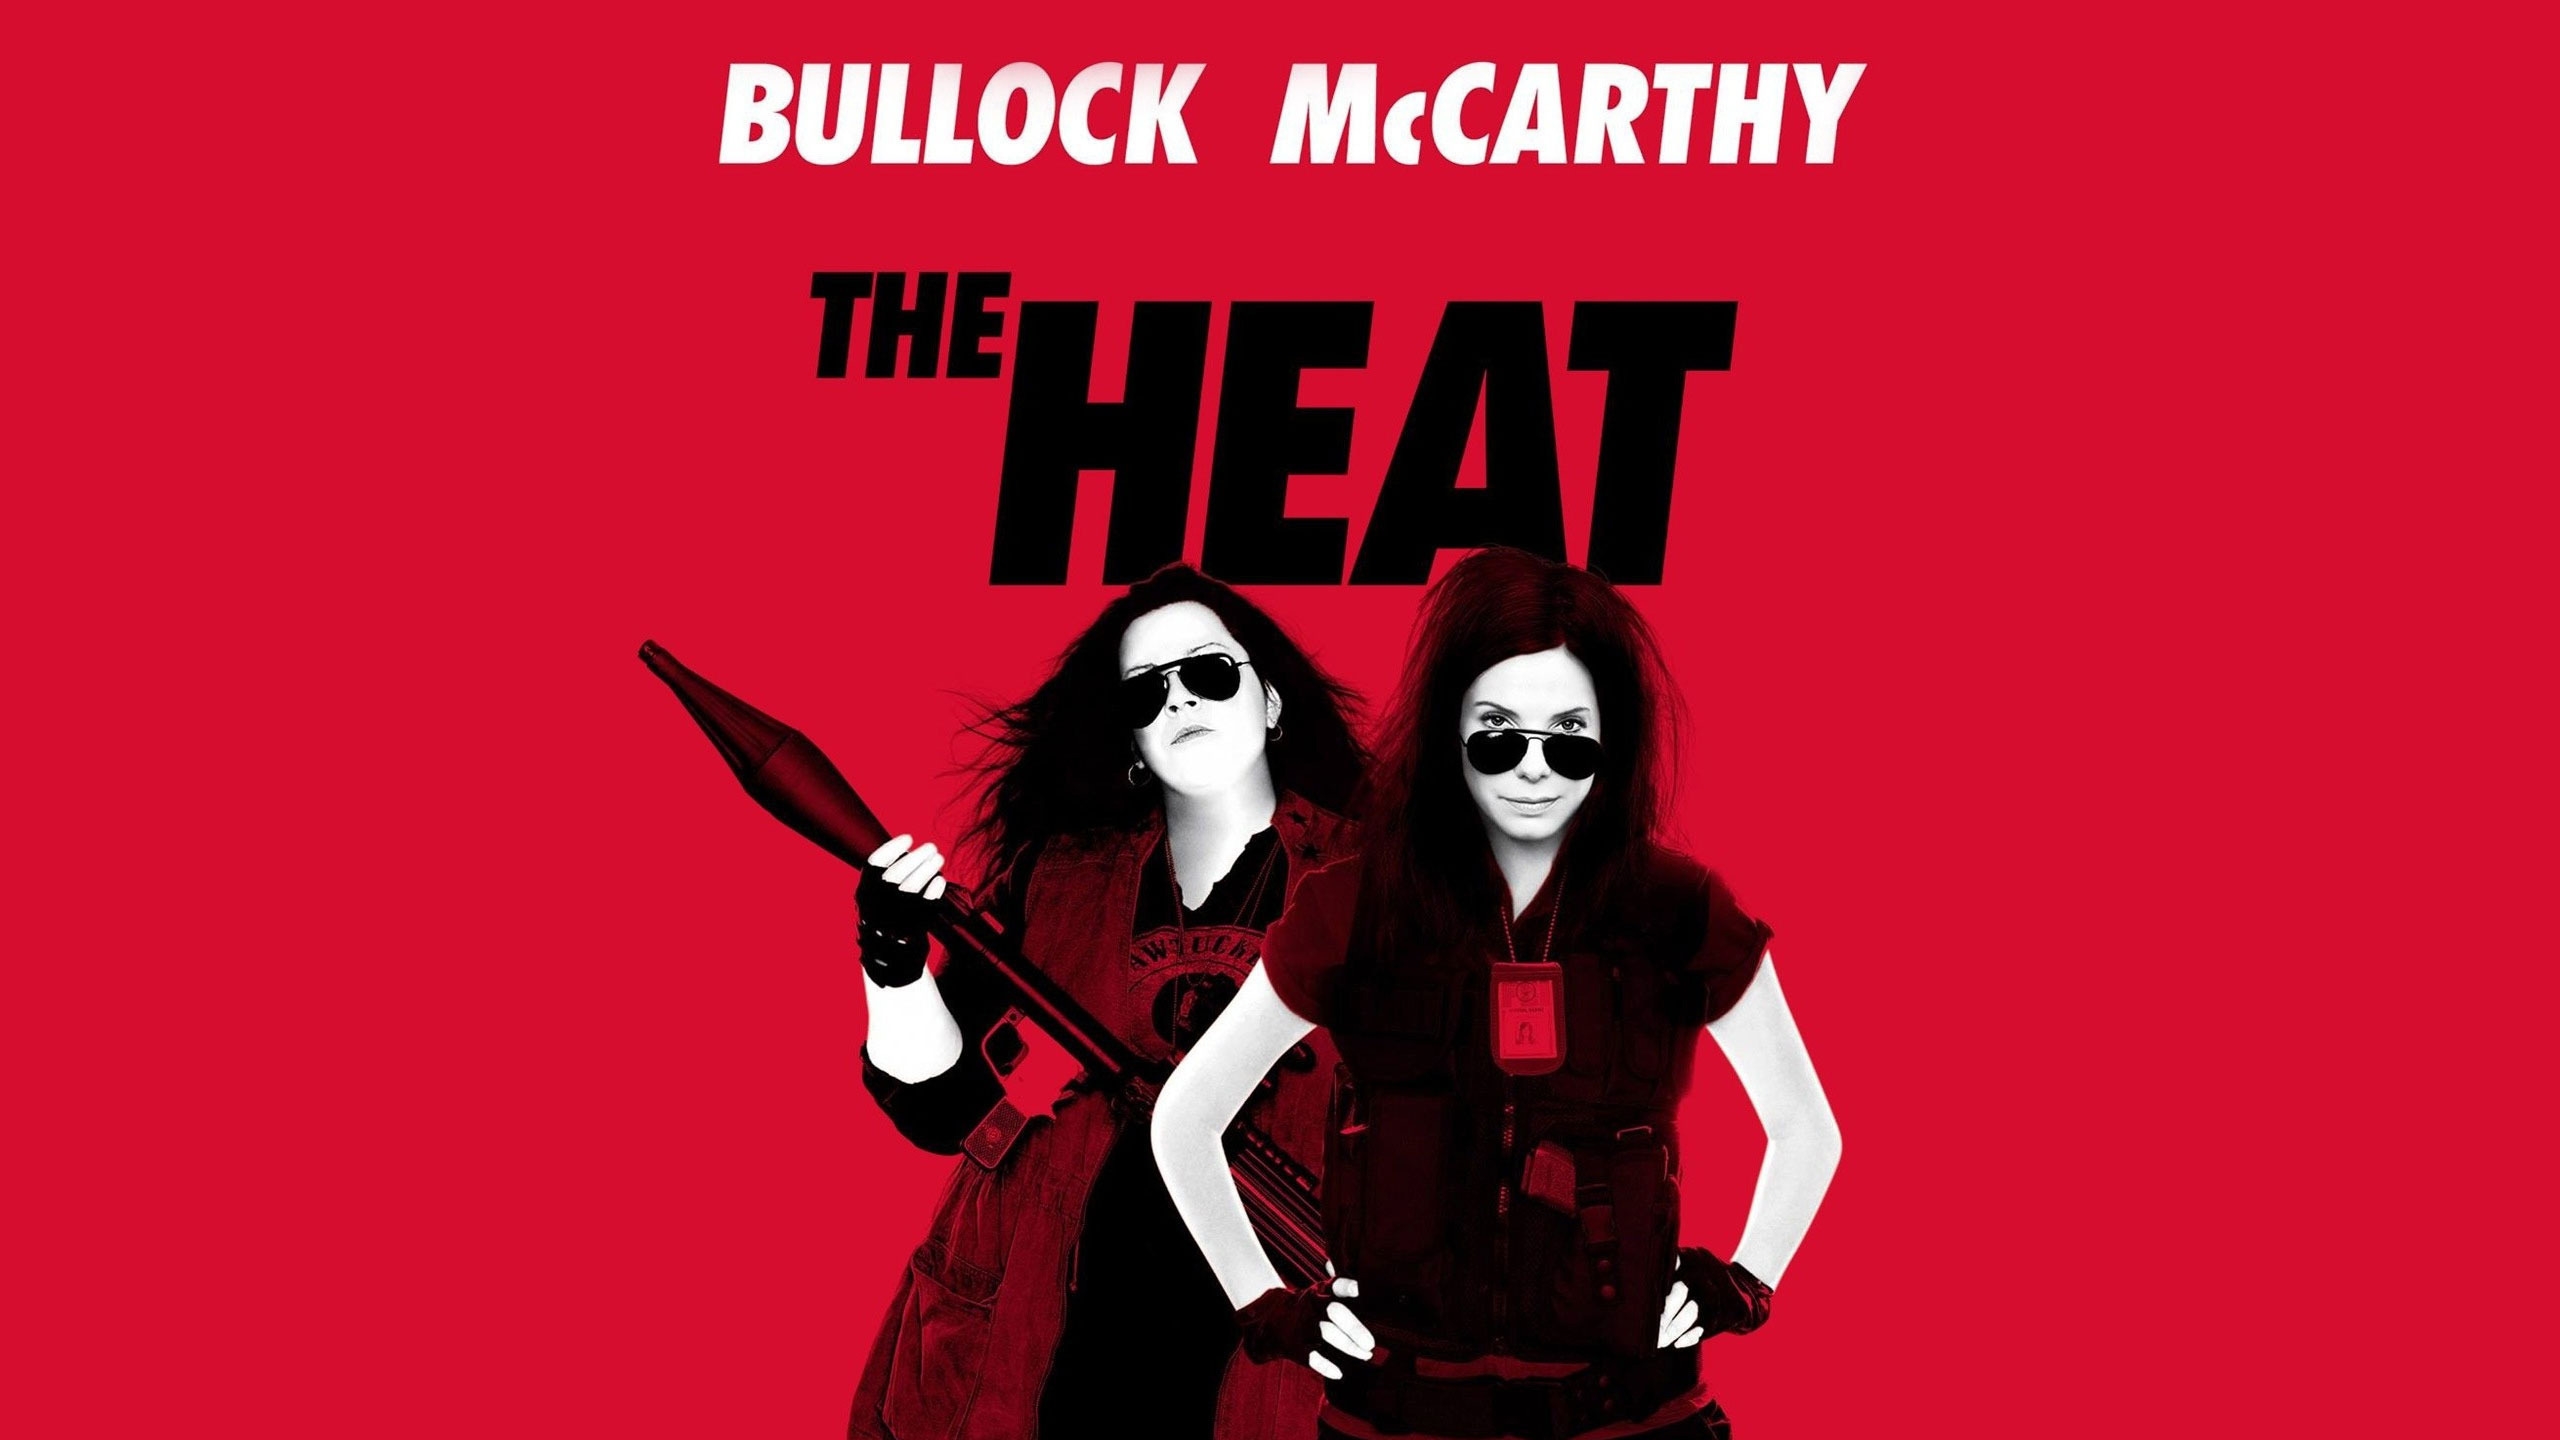 The Heat 2013 for 2560x1440 HDTV resolution